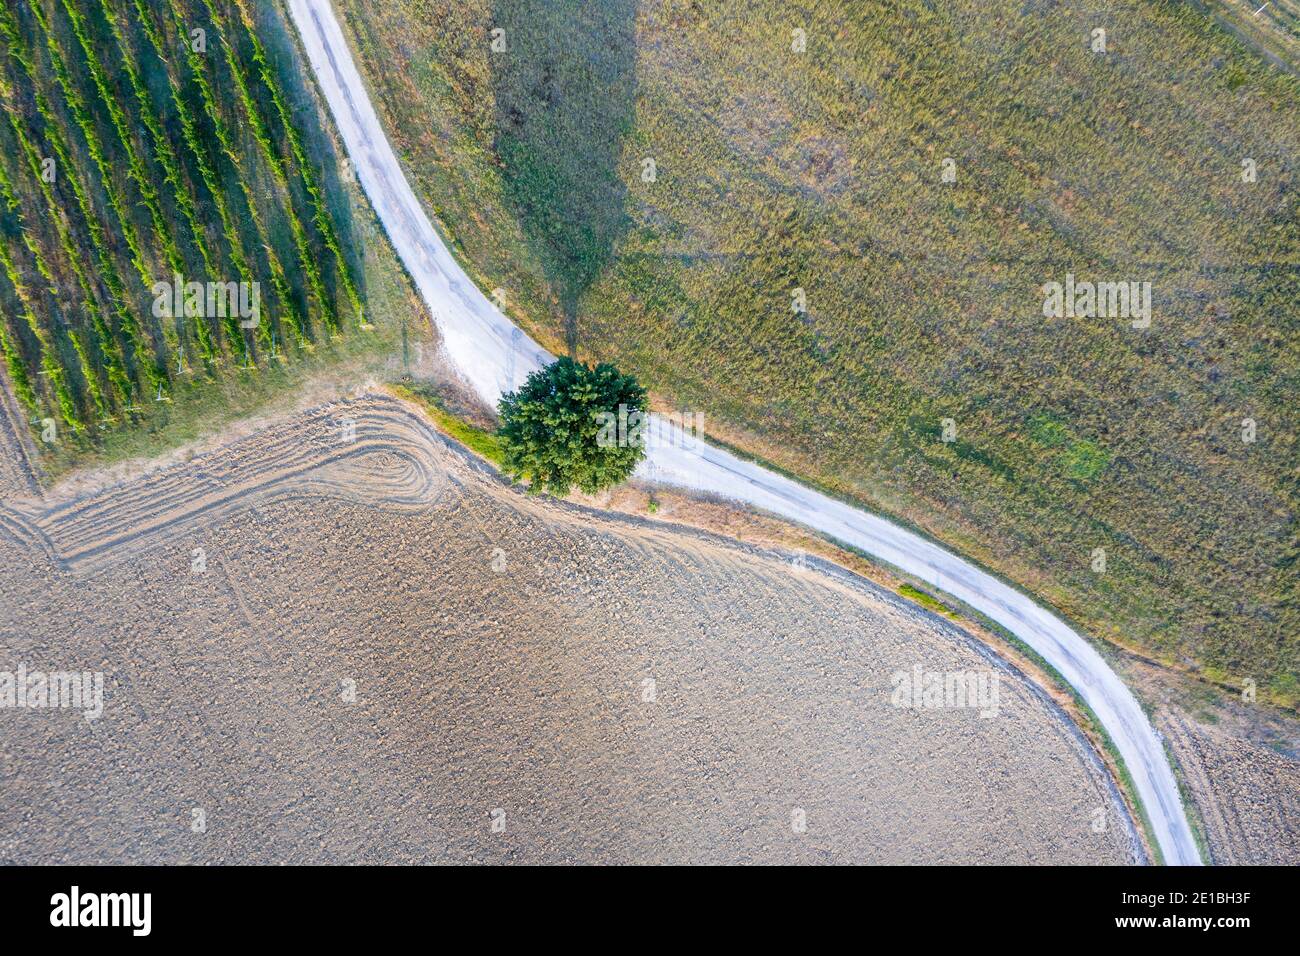 Top down view of a solitary tree on a S shaped road in the Italian countryside outside Fabriano, Marche. Drone capture. Stock Photo